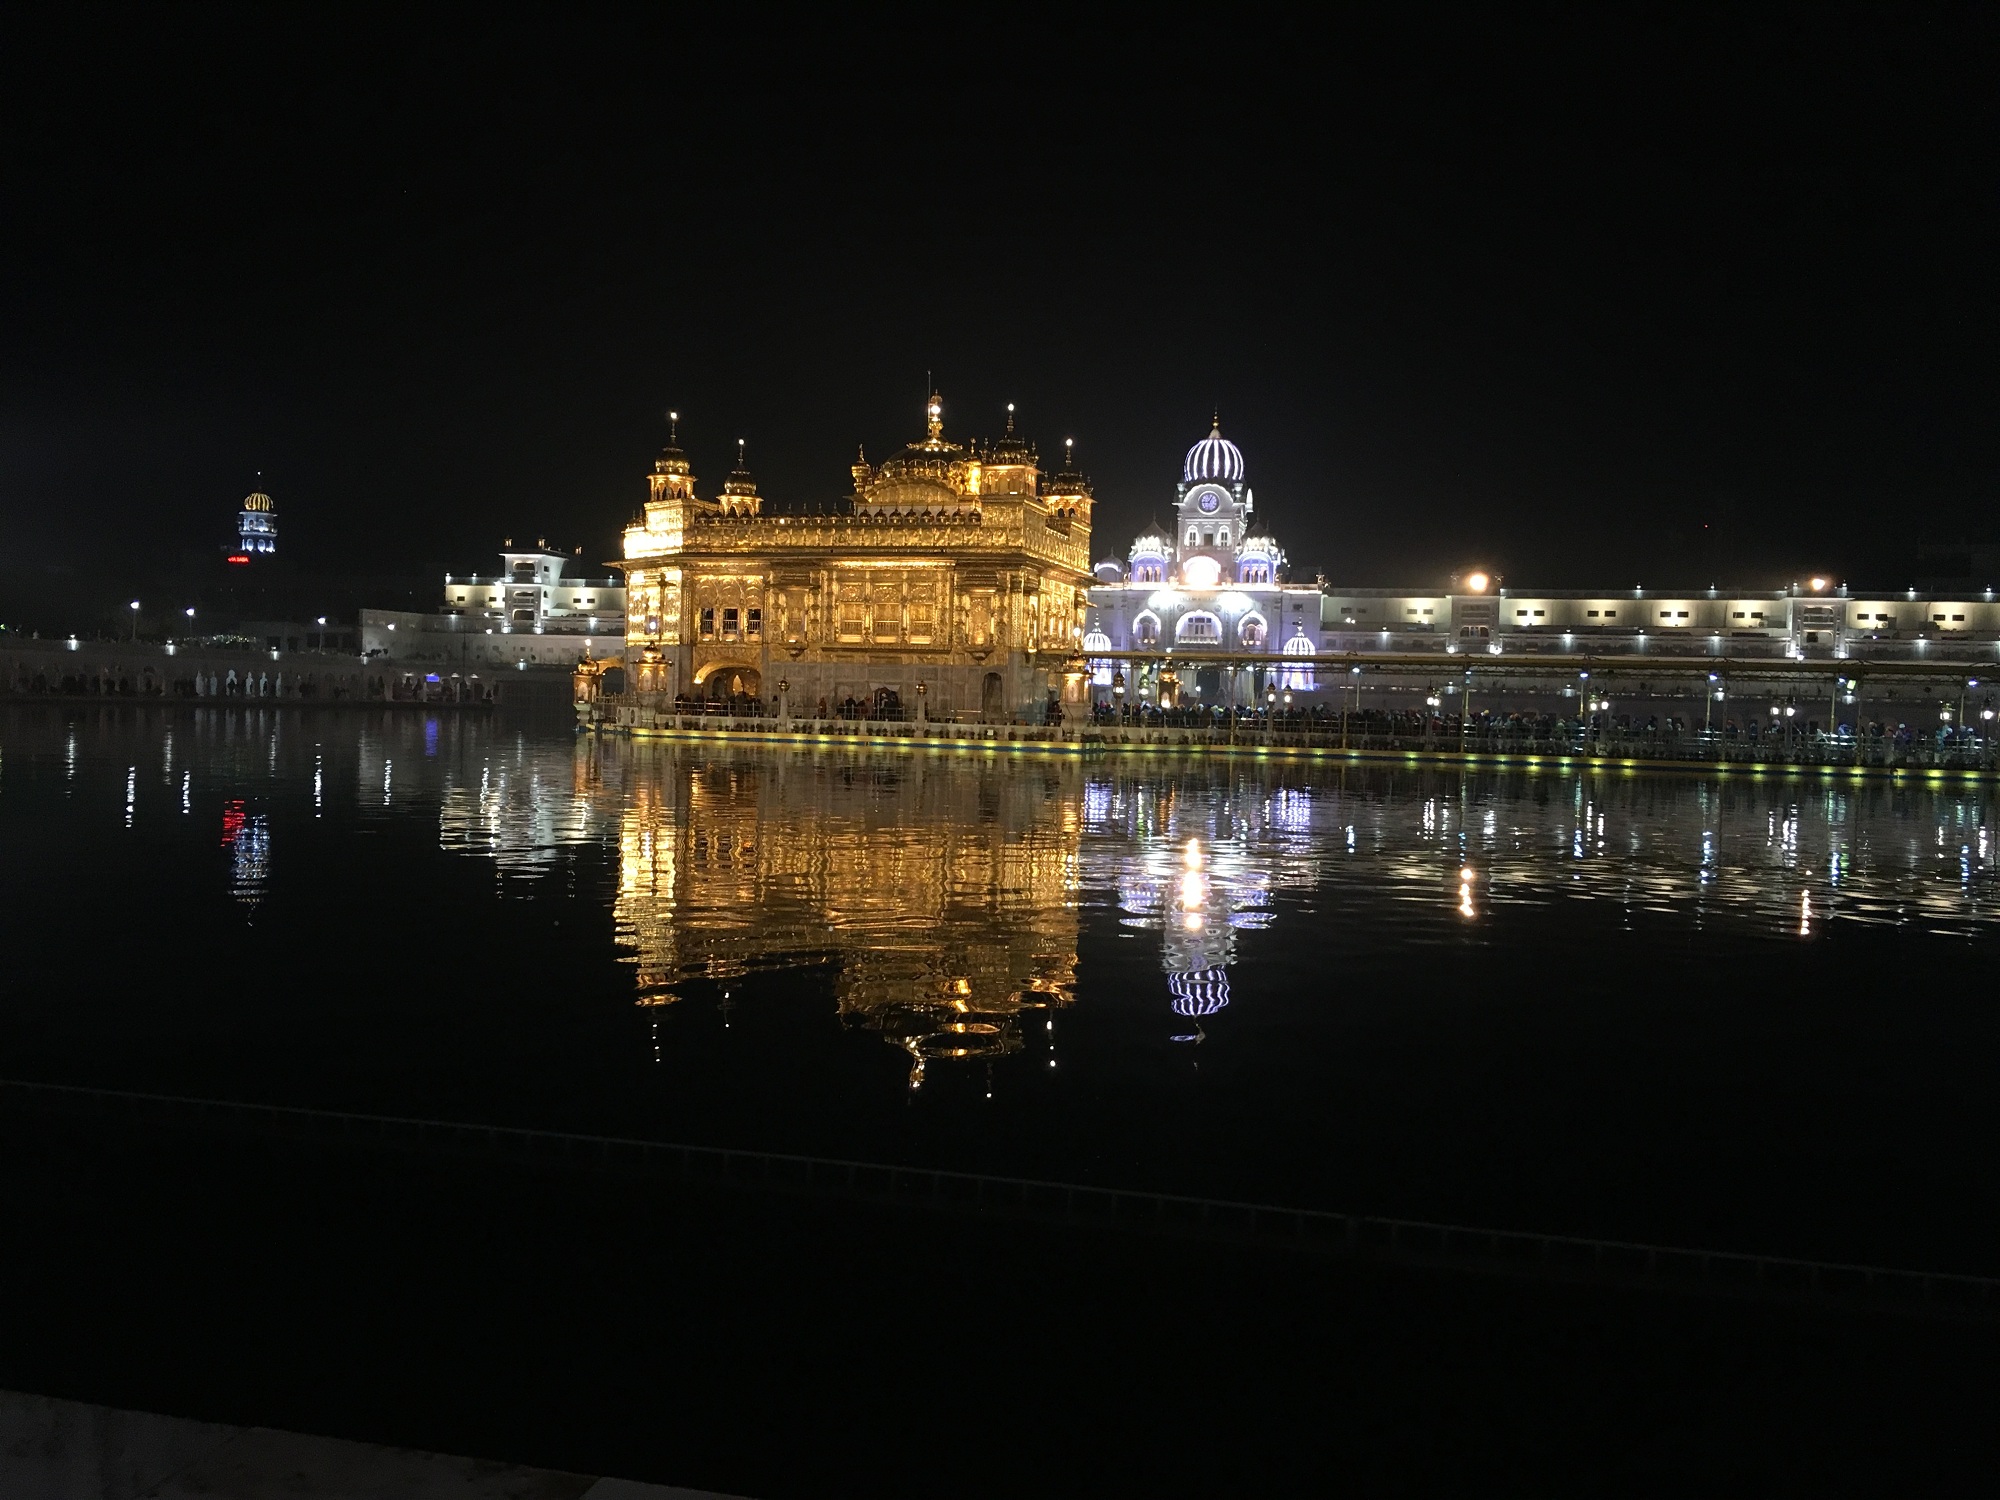  Golden Temple wide angle shot